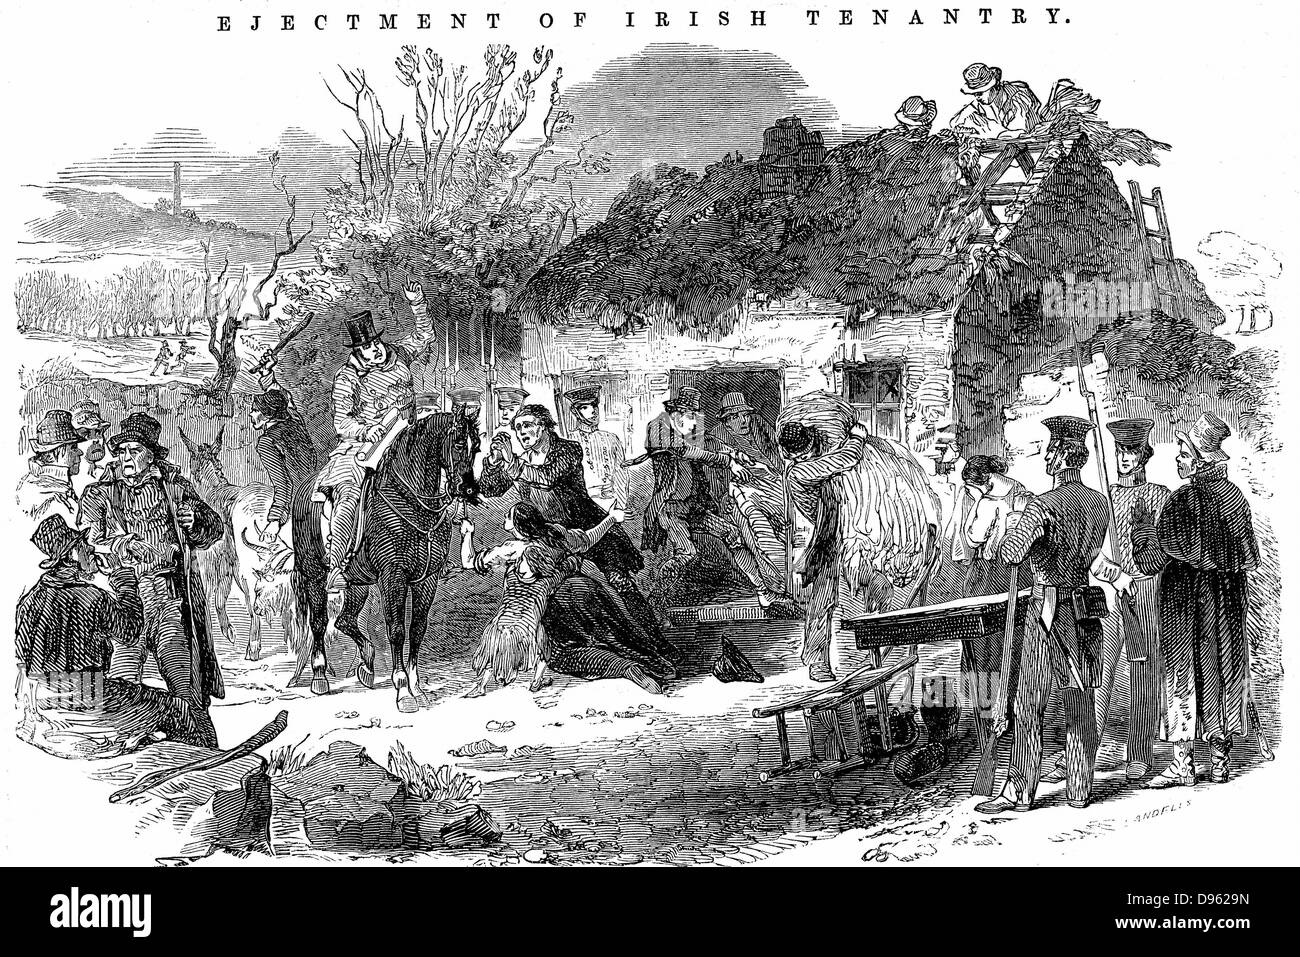 Potato Famine: Irish peasant family unable to pay rent because of failure of potato crop due toPotato  Blight (Phytophthora infestans),  evicted from their tumbledown cottage. From 'The Illustrated London News' December 1848.  Wood engraving Stock Photo